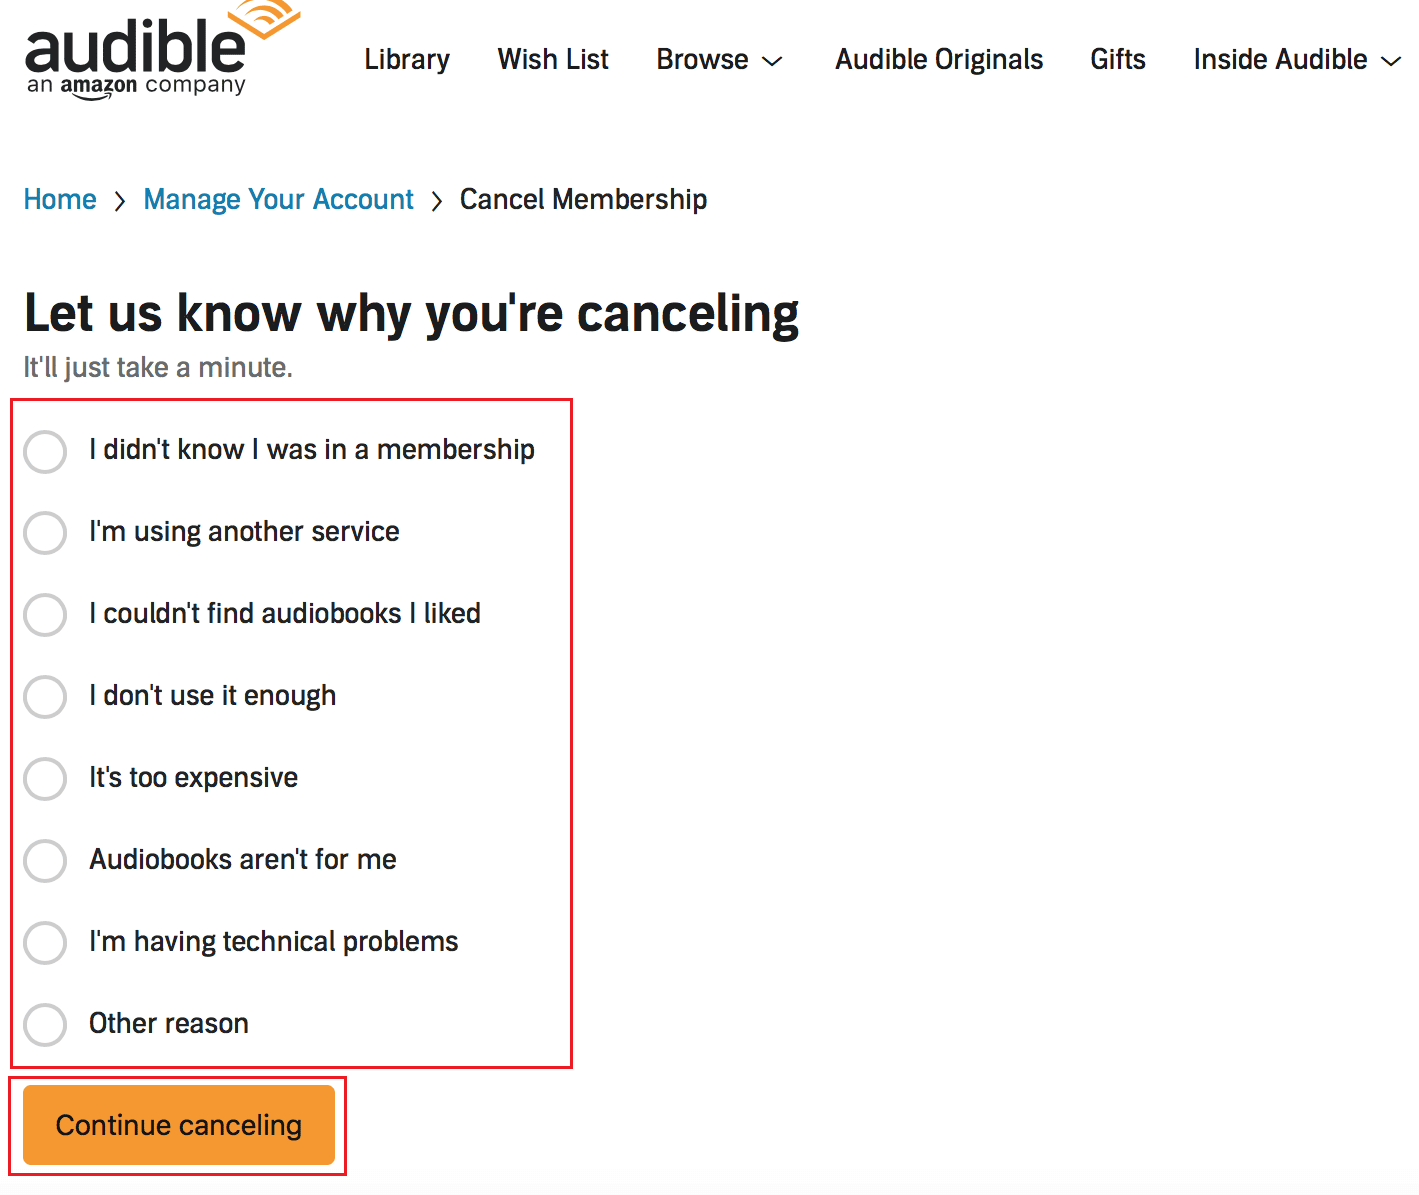 Select any desired reason and click on Continue canceling